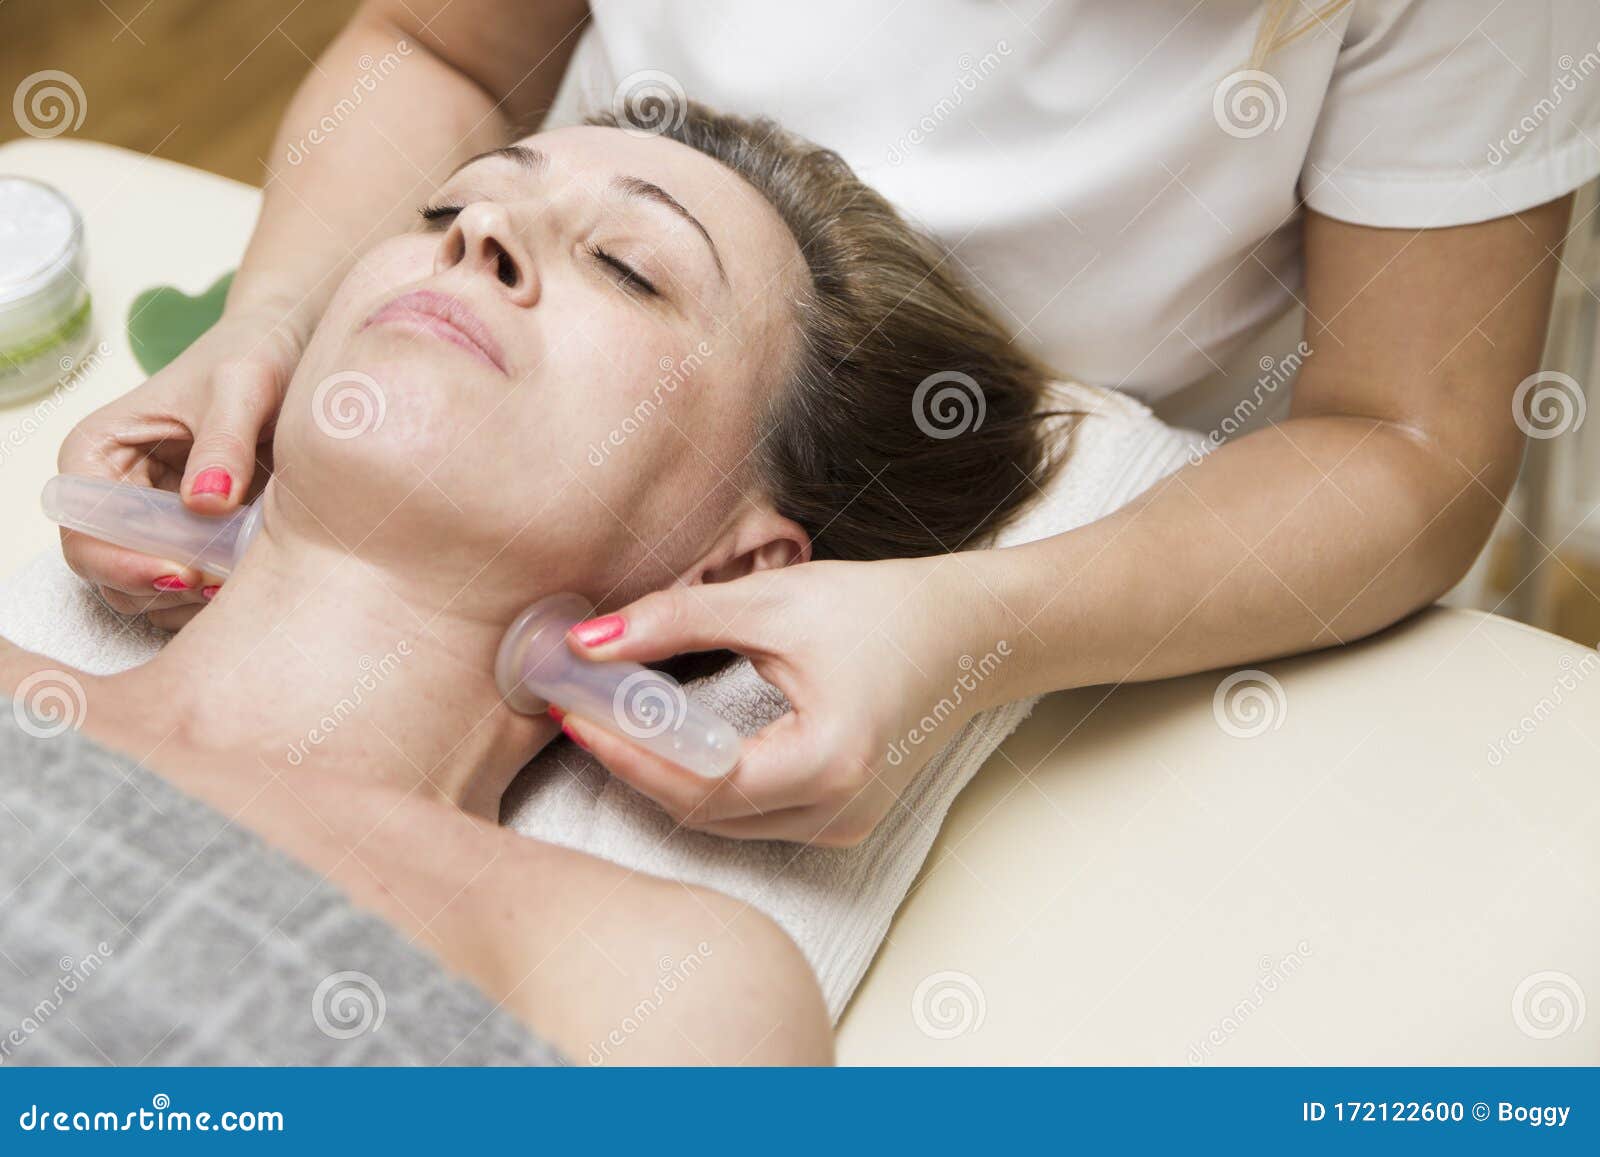 cup applied to neck skin of a female patient as part of the traditional method of cupping therapy